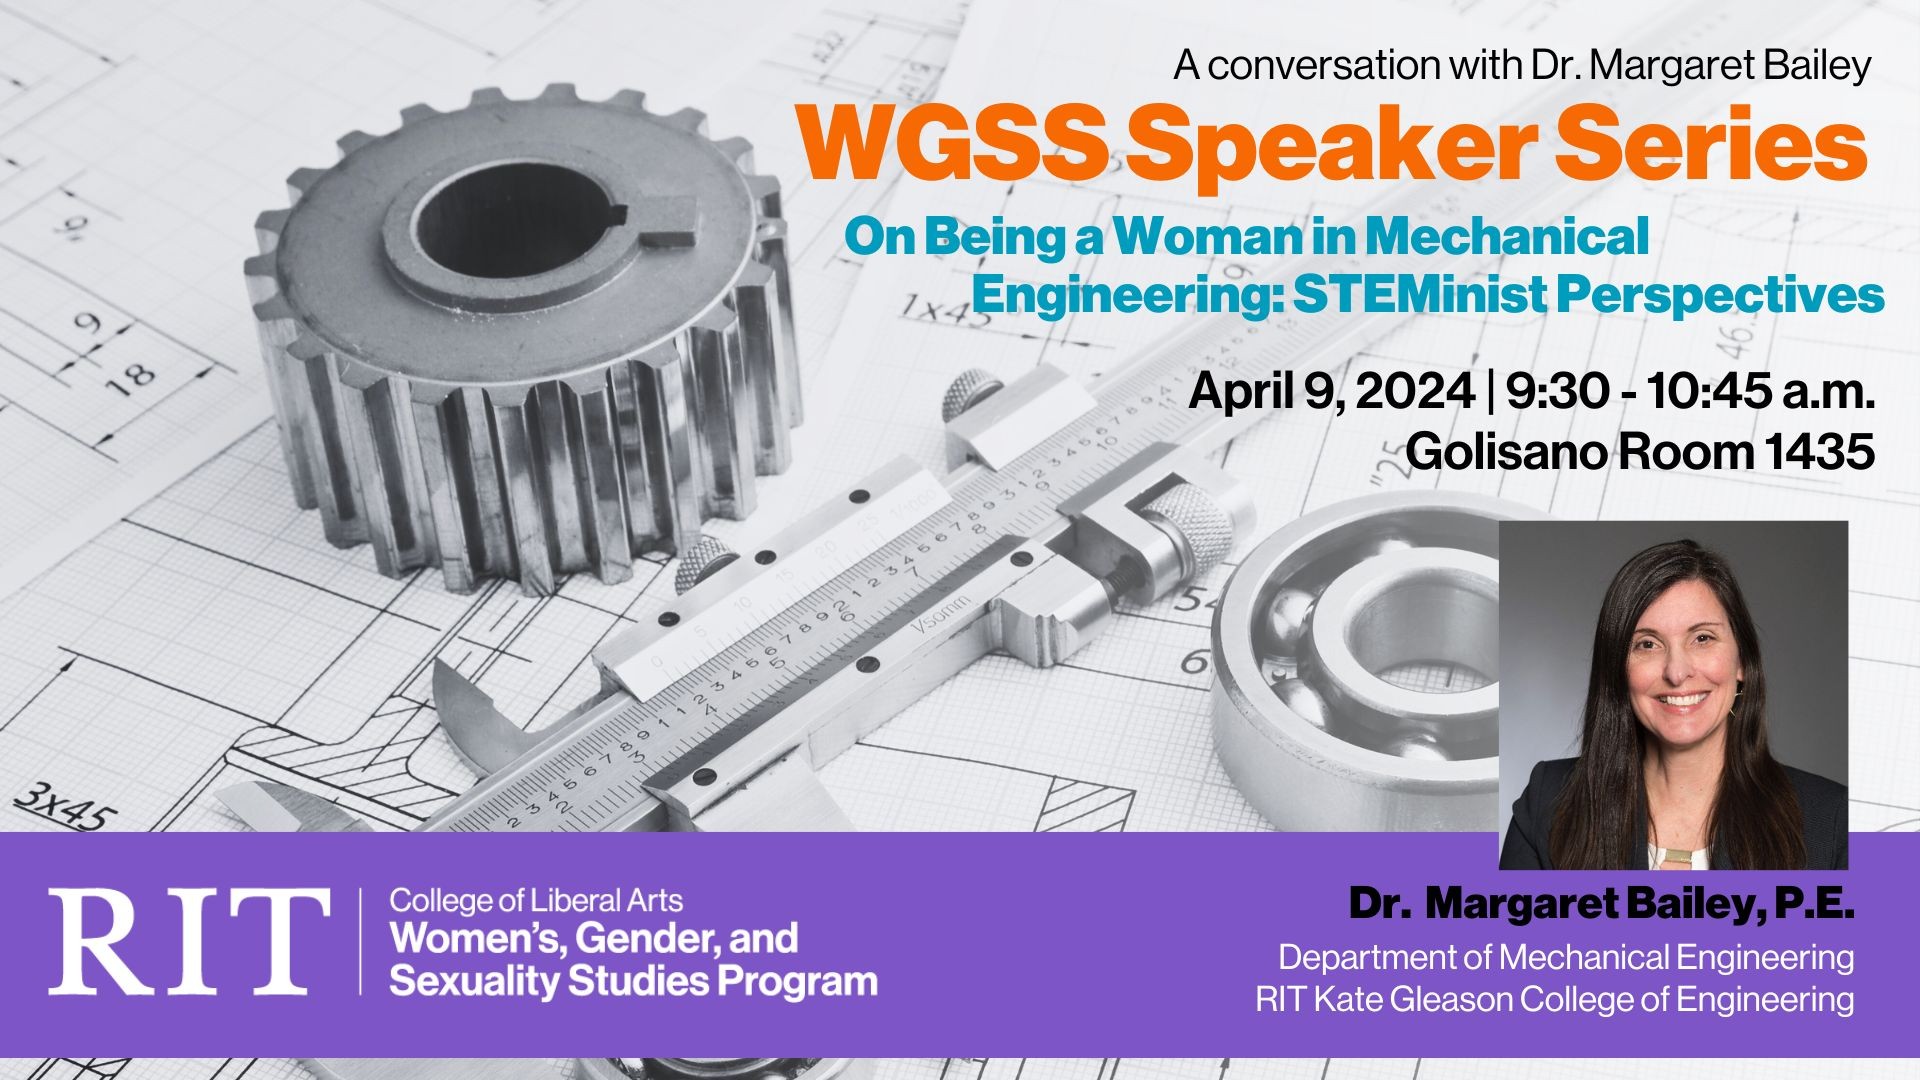 WGSS Speaker Series with Margaret Bailey--On Being a Woman in Mechanical Engineering: A STEMinist Perspective